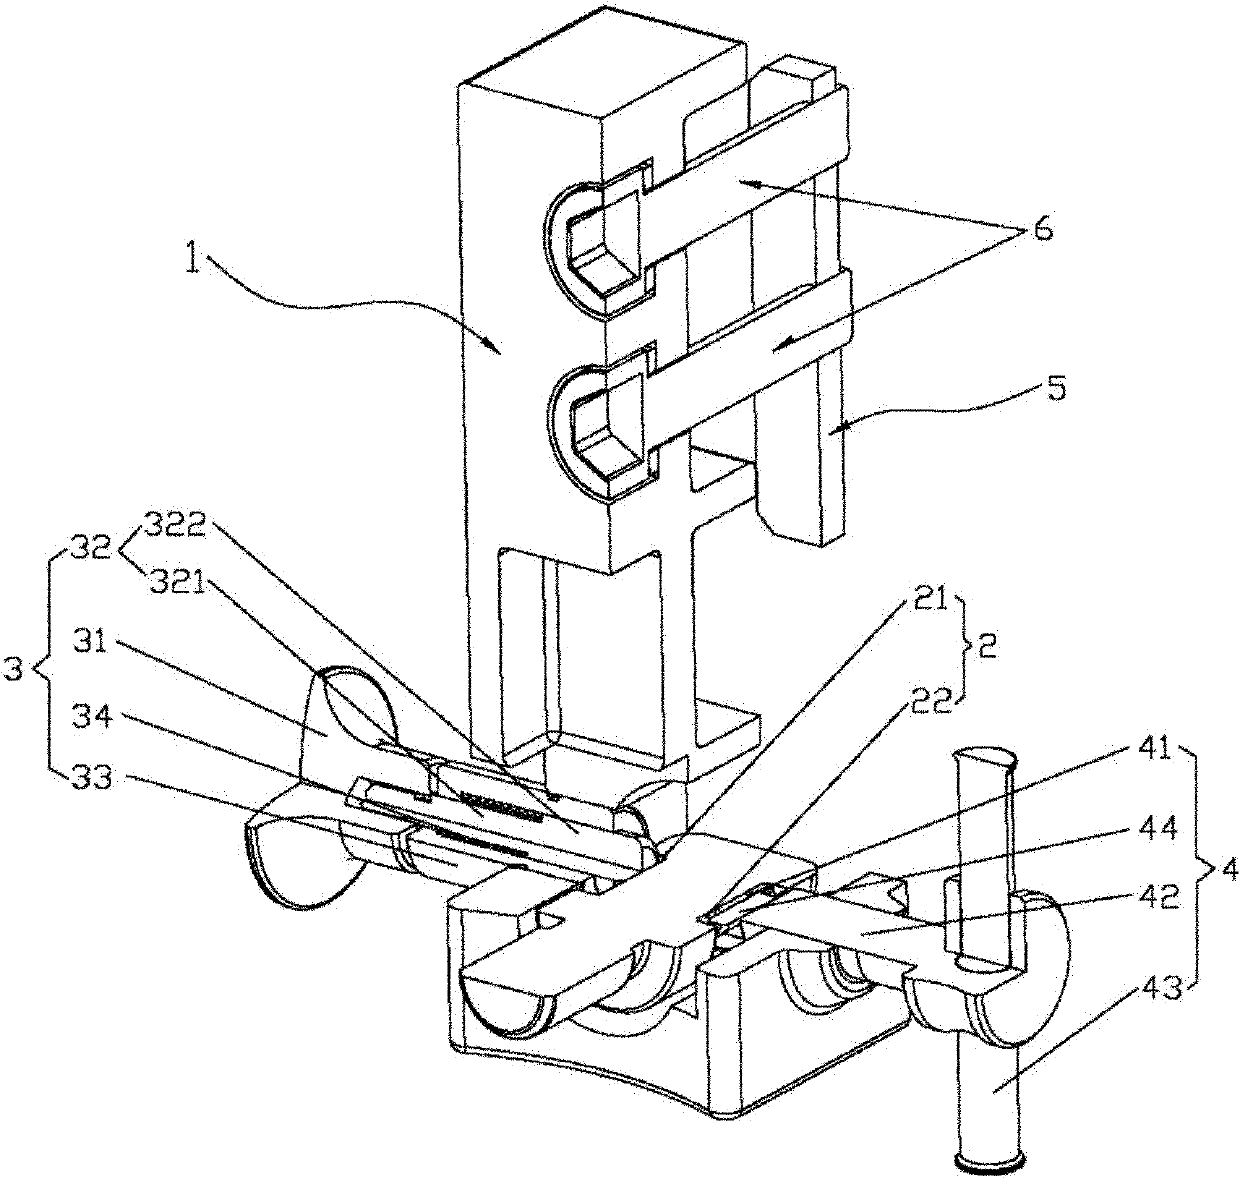 Locking structure with double-locking function and omnibearing automatic reflecting work light